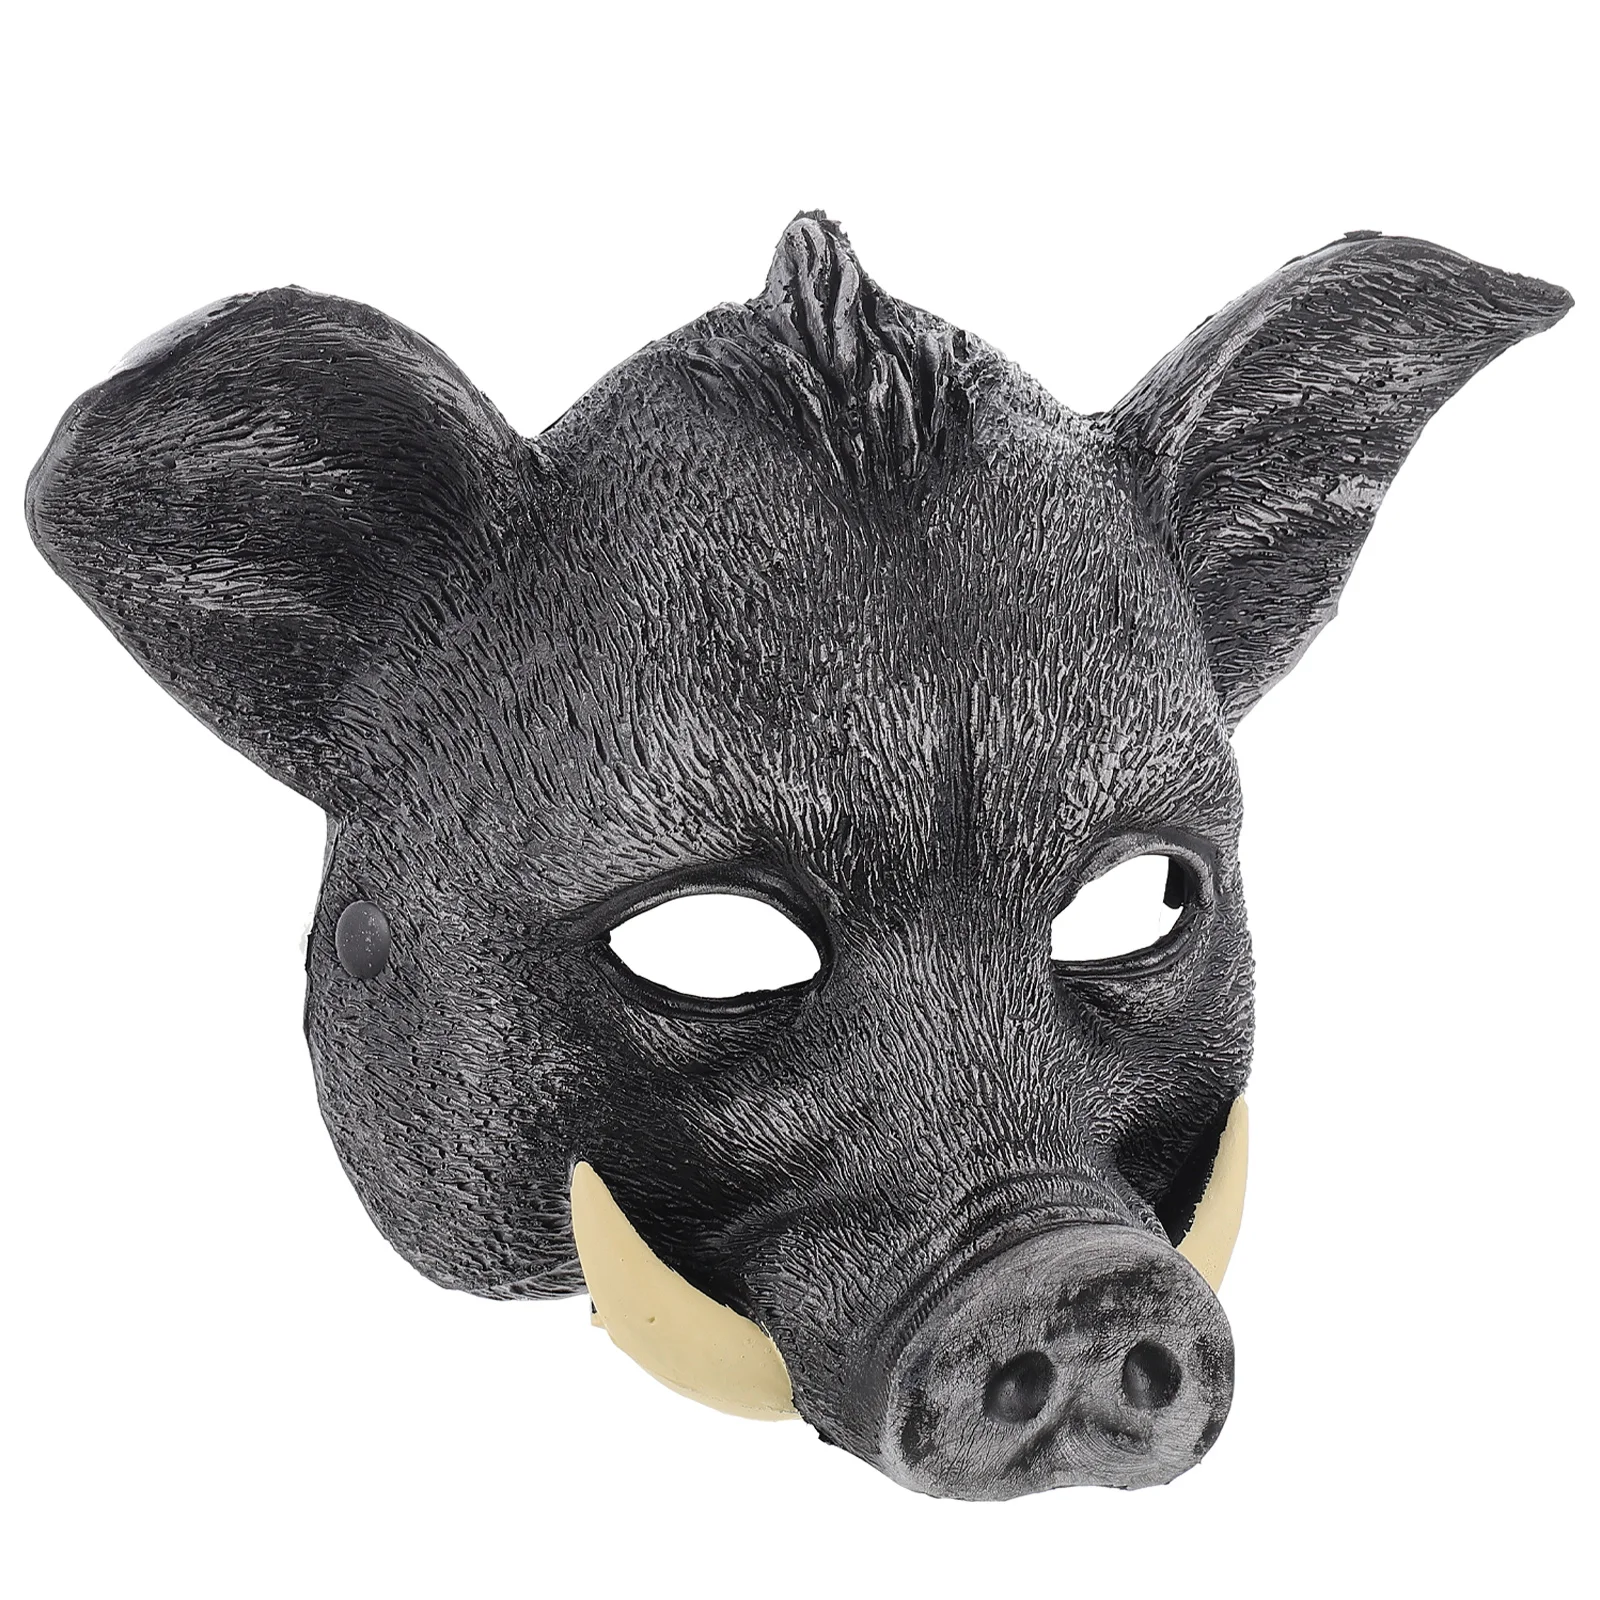 

Boar Mask Cosplay Costumes Festival Props Wild Design Makeup Animal Interesting Pu Masquerade Accessory Party